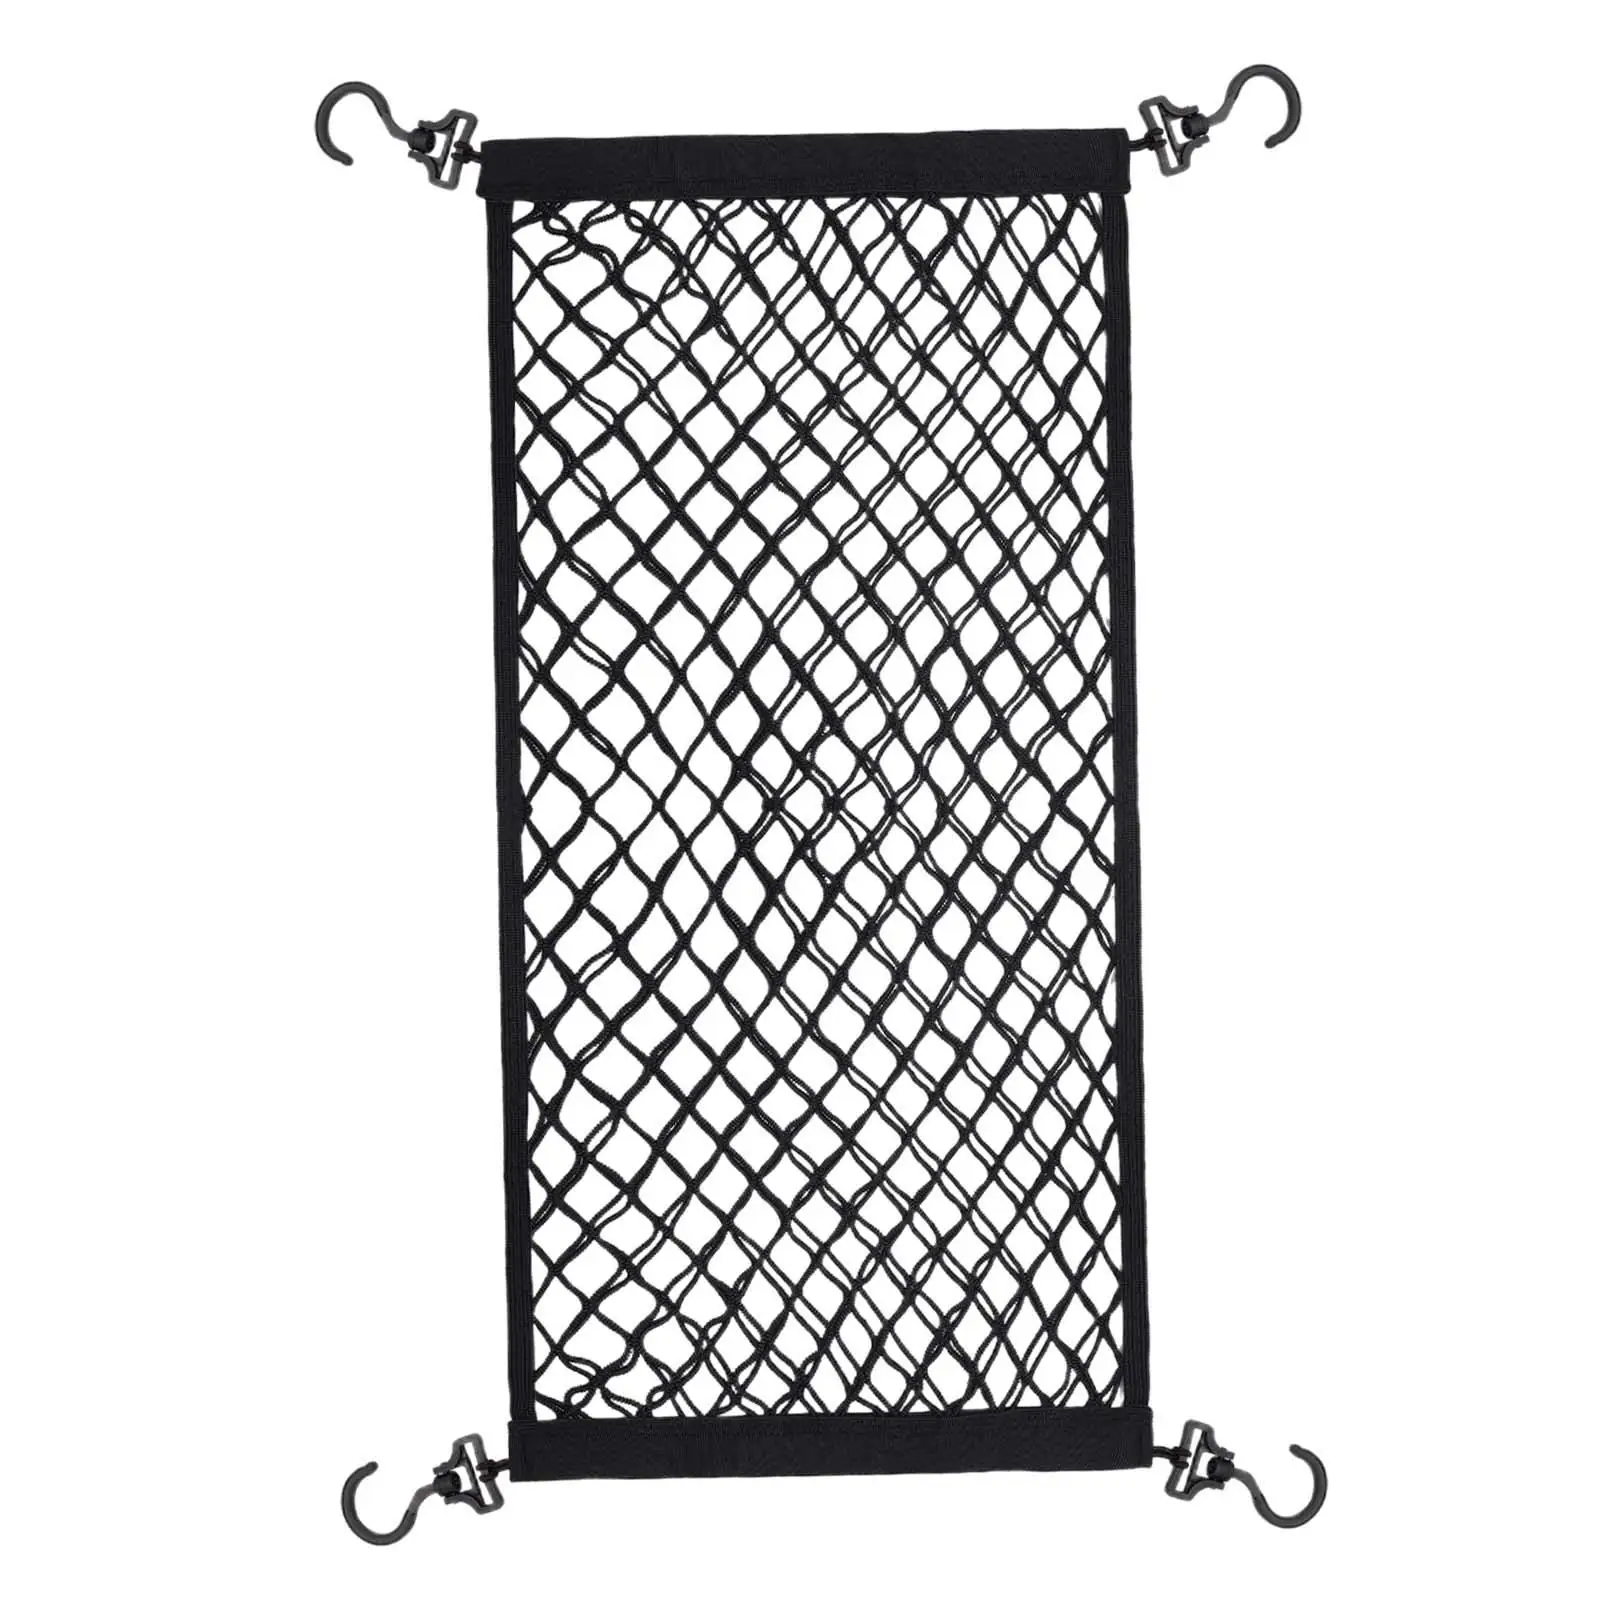 Car Ceiling Cargo Net Pocket Storage Mesh Netting with Hooks Mesh Pouch Camping Cargo Net for Garden Cart Road Trip Beach Carts